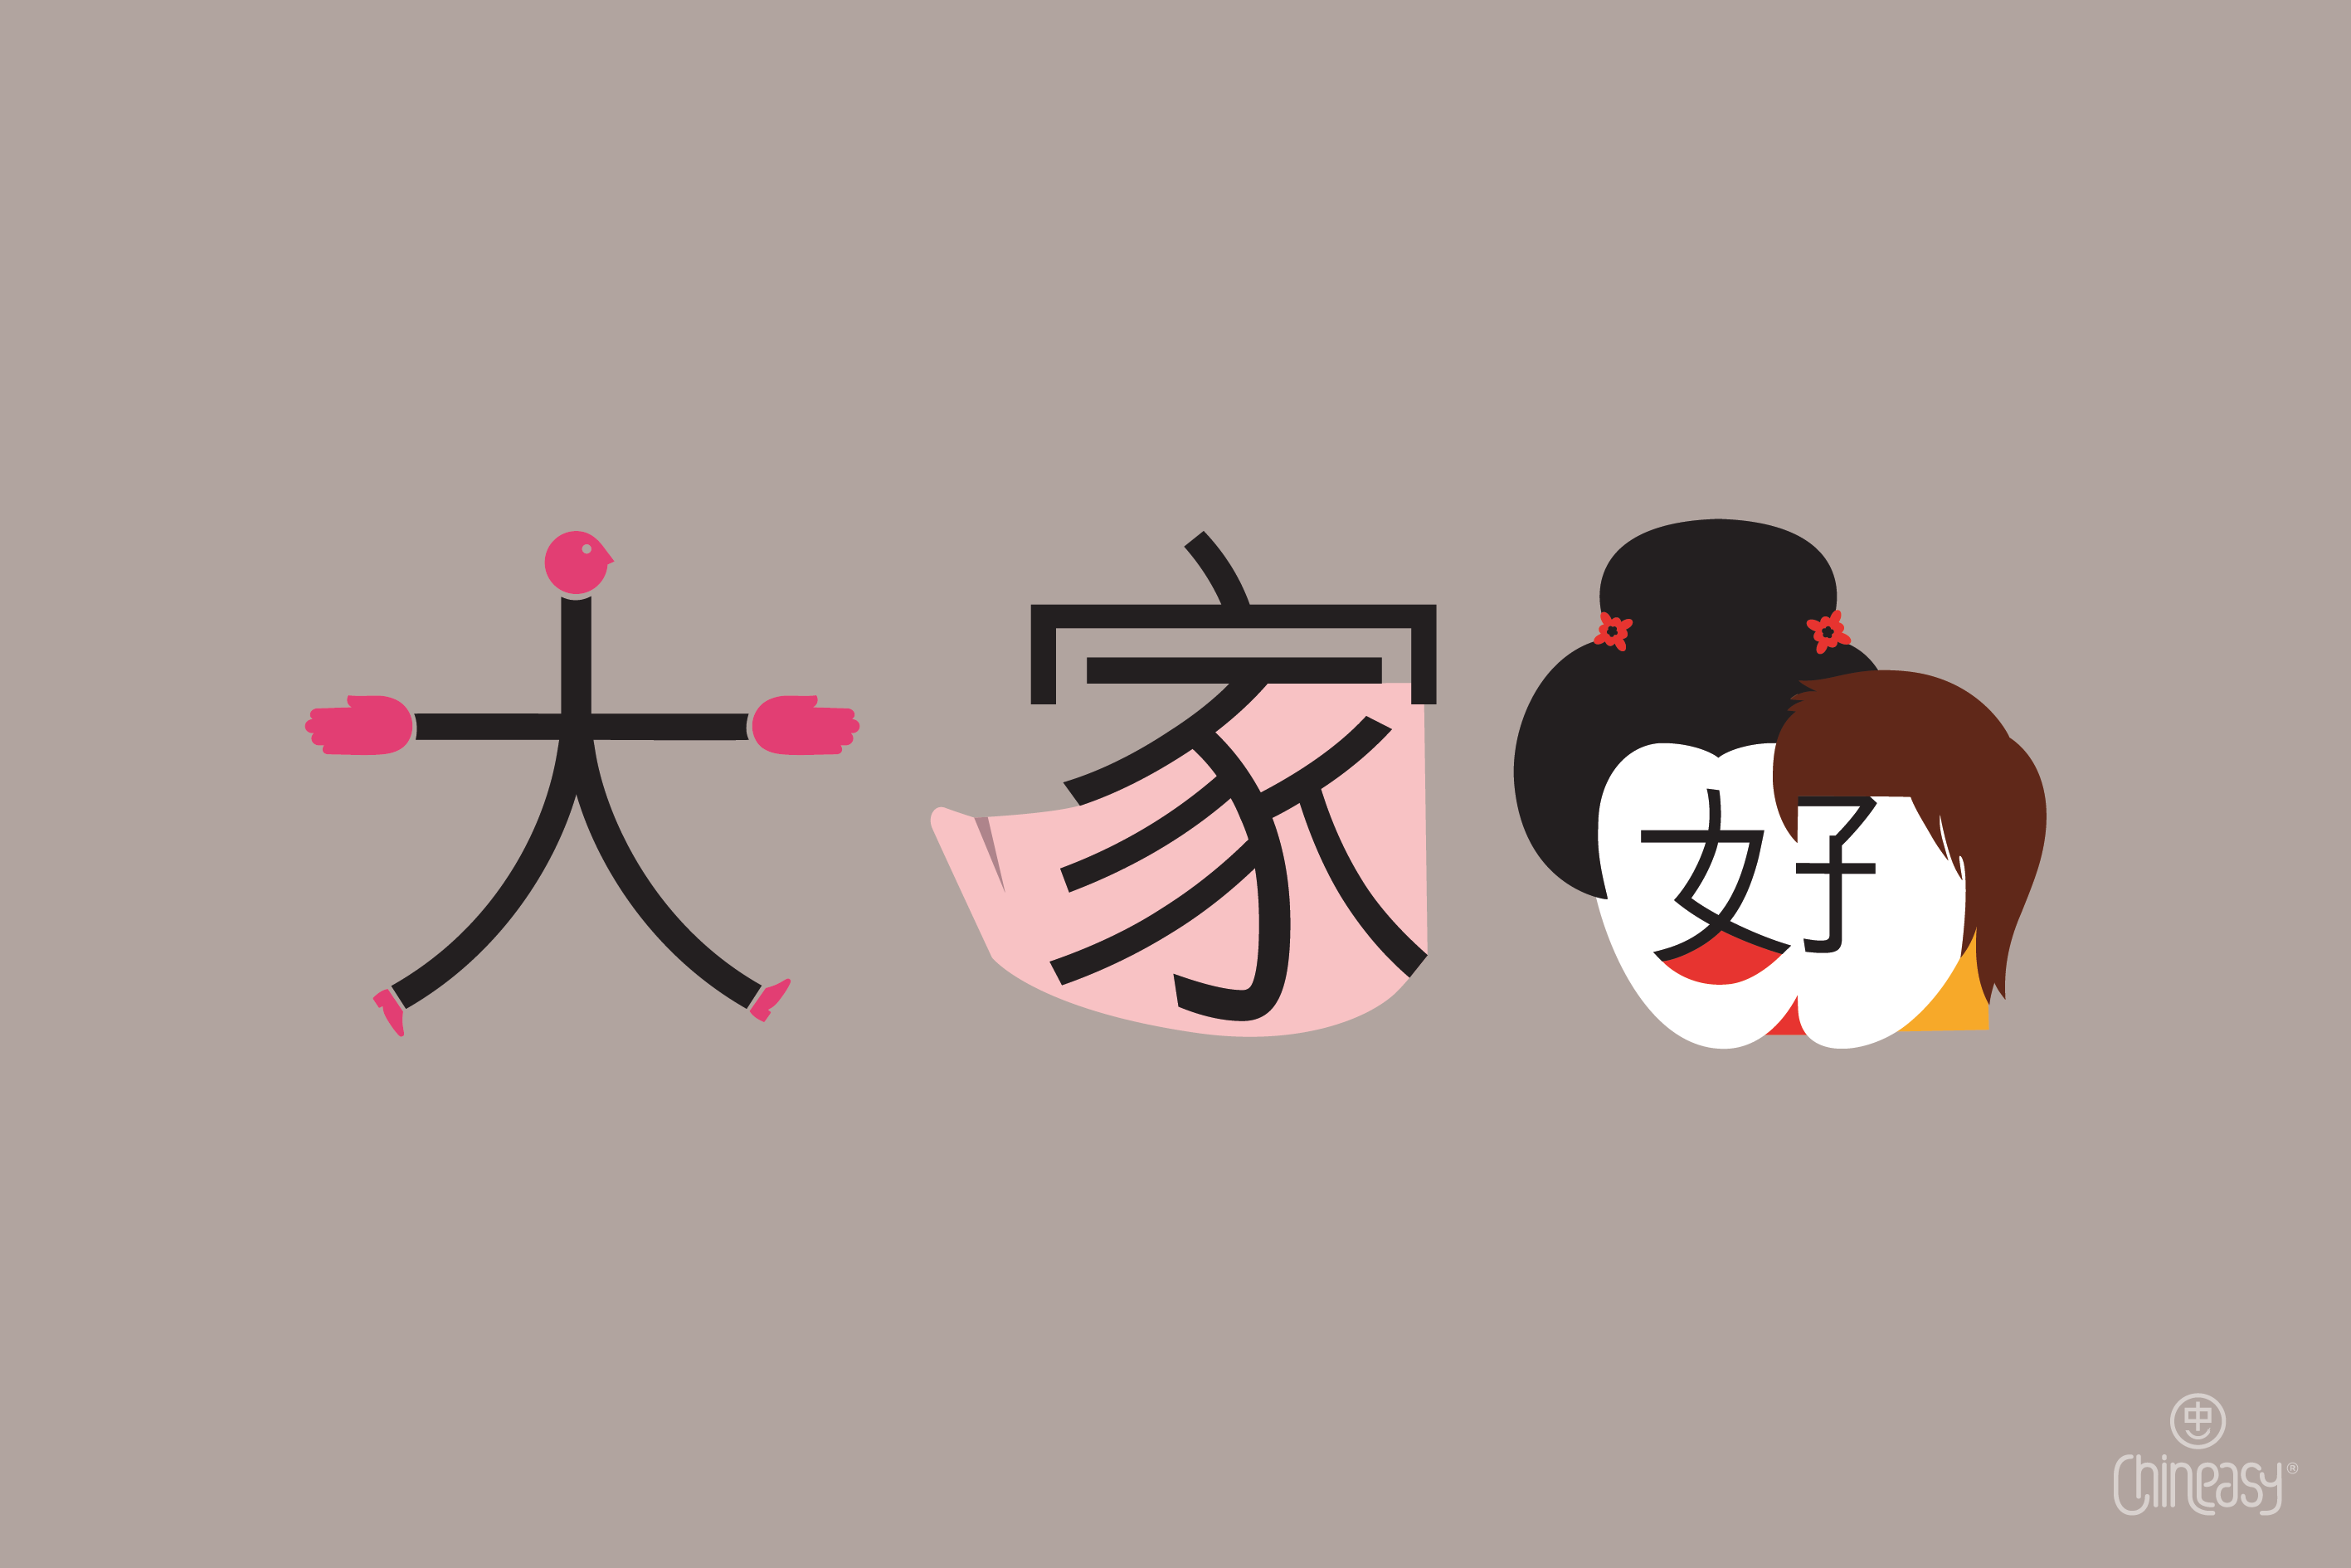 Chineasy Blog  For Beginners: 10 Easiest Chinese Greetings